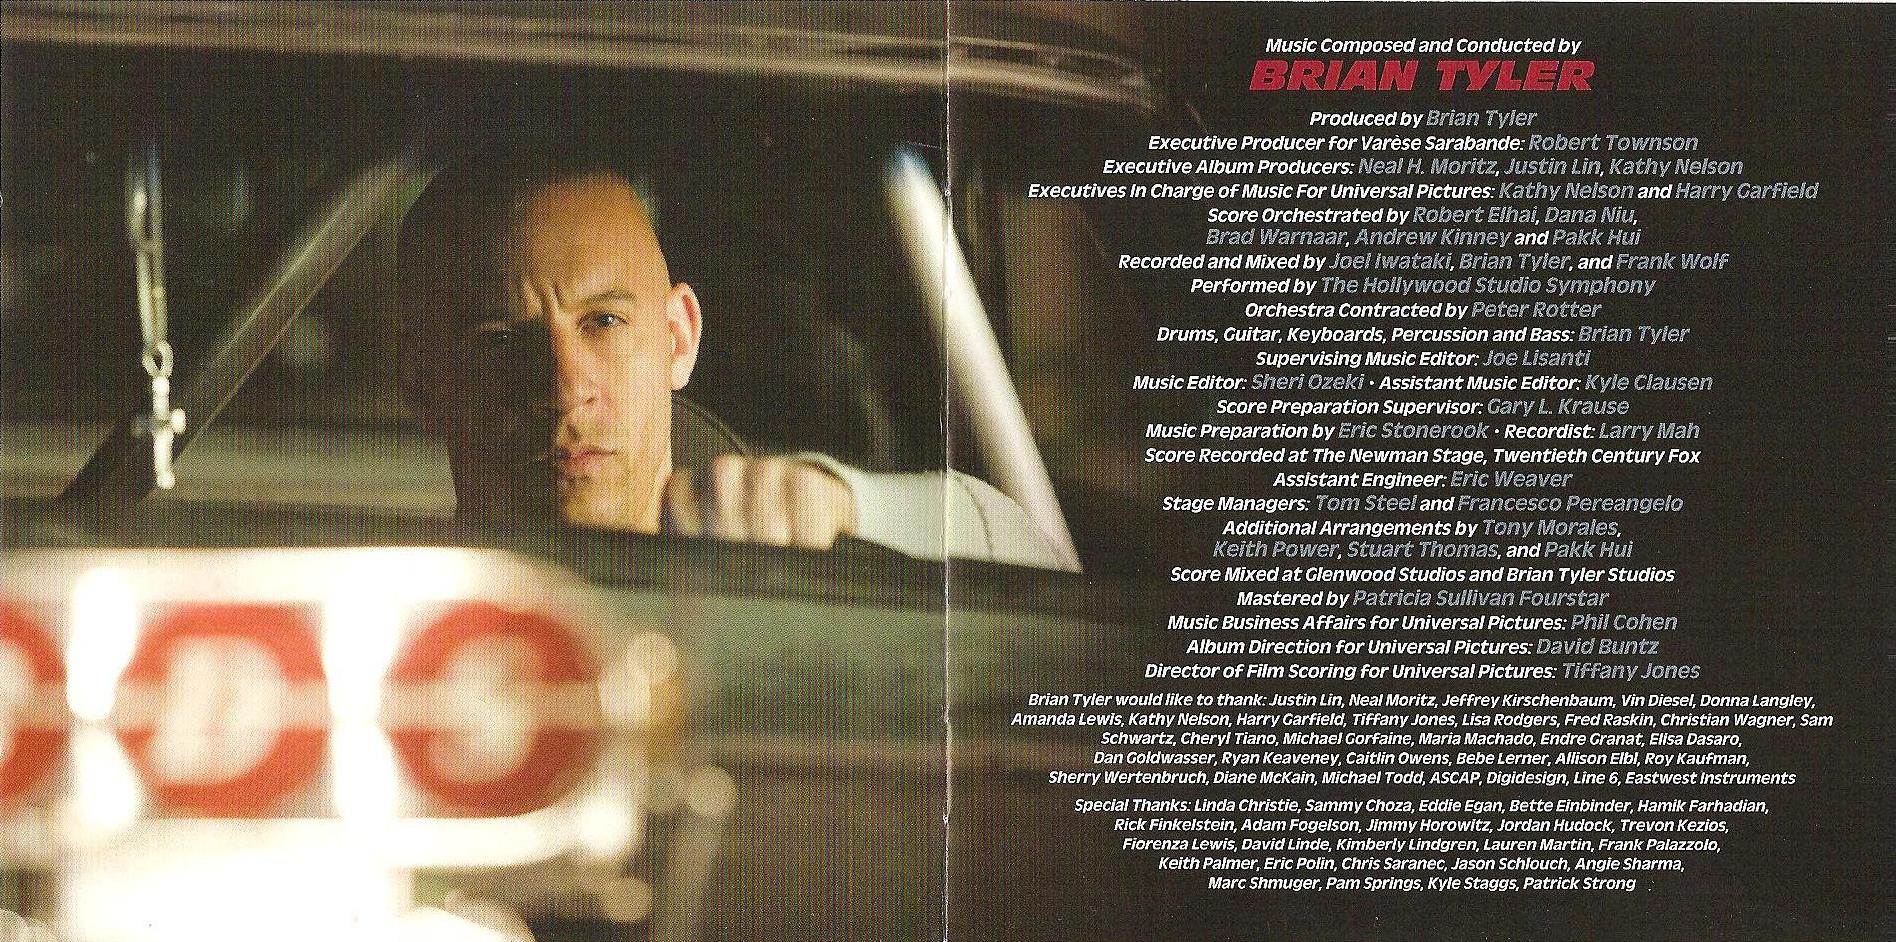 Soundtrack fast. OST Форсаж 4. Форсаж 4 OST FLAC. The Transporter 2002 Original Motion picture score. Fast x Soundtrack _ move - Brian Tyler _ Original Motion picture score _.